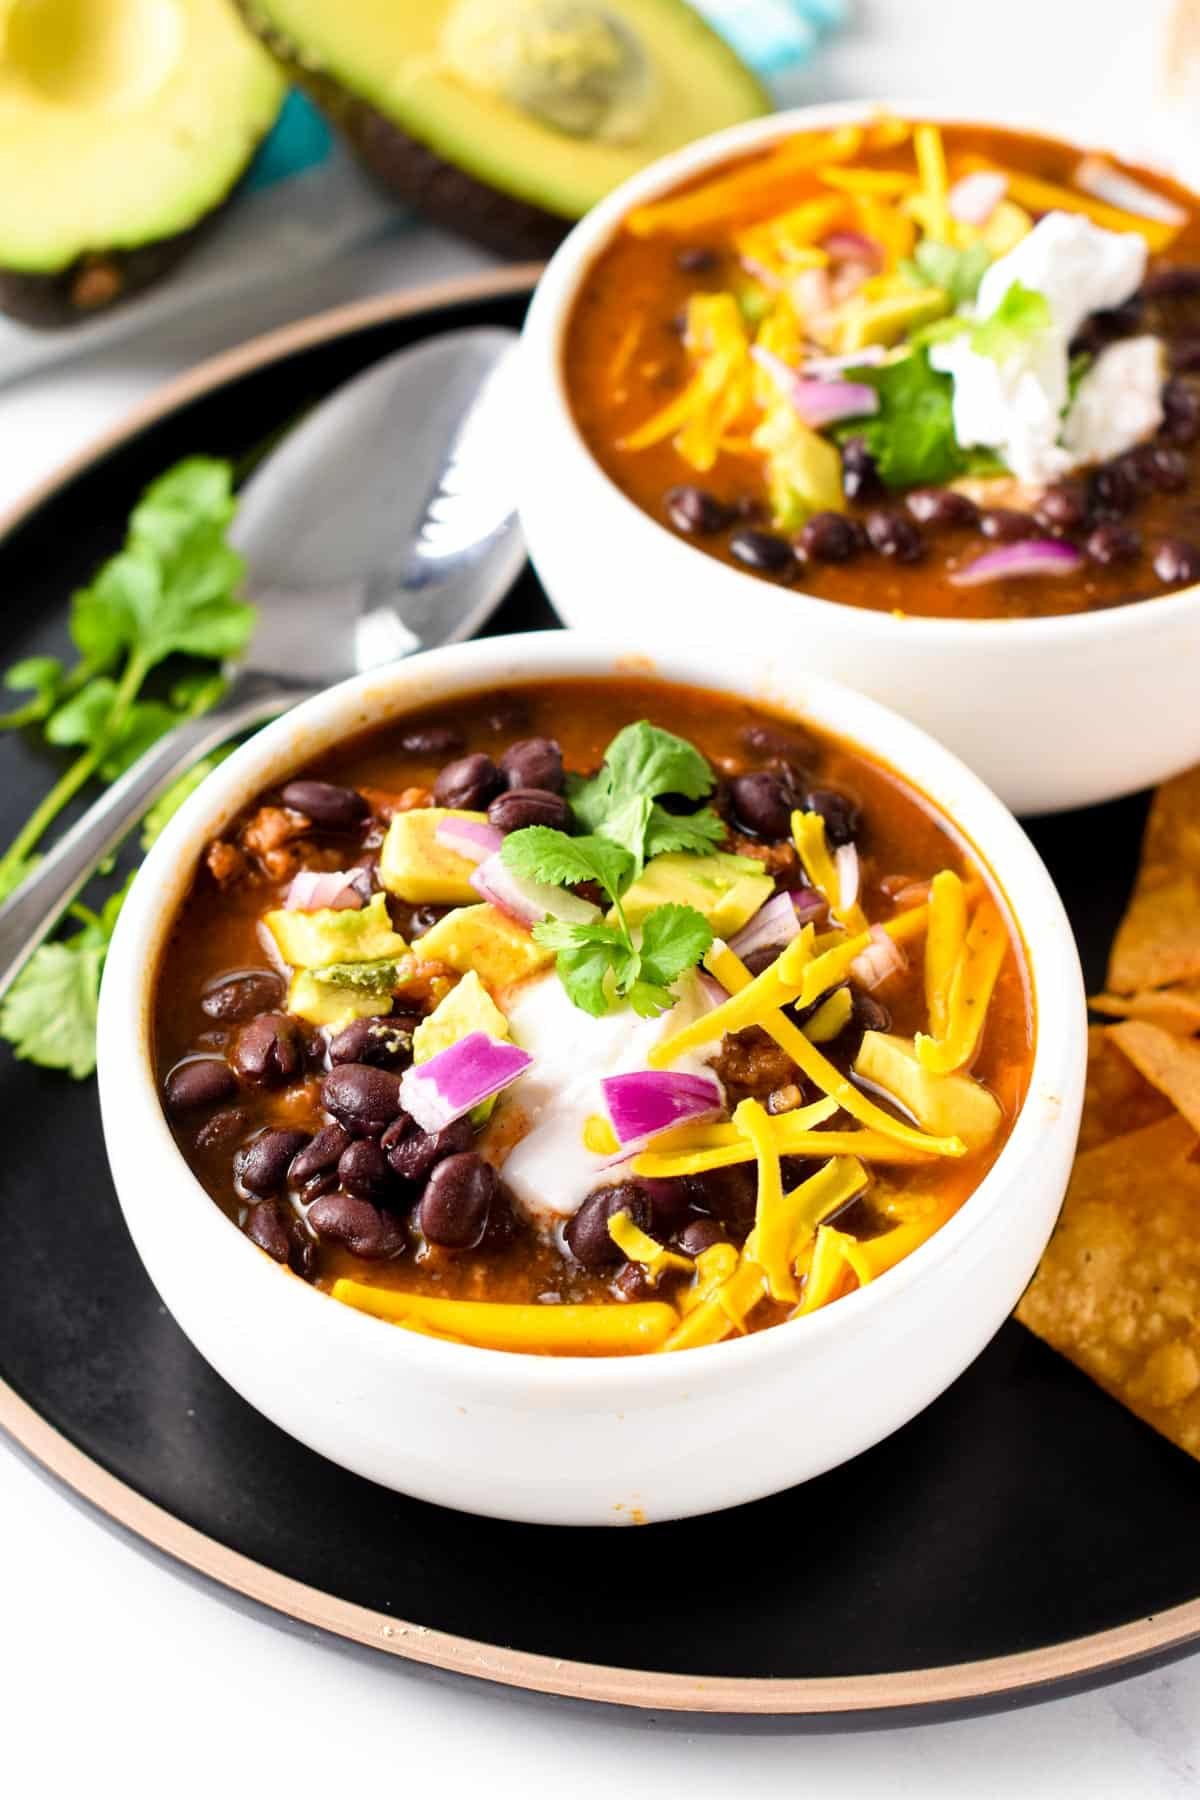 Must-Have Ingredients for Delicious Taco Soup